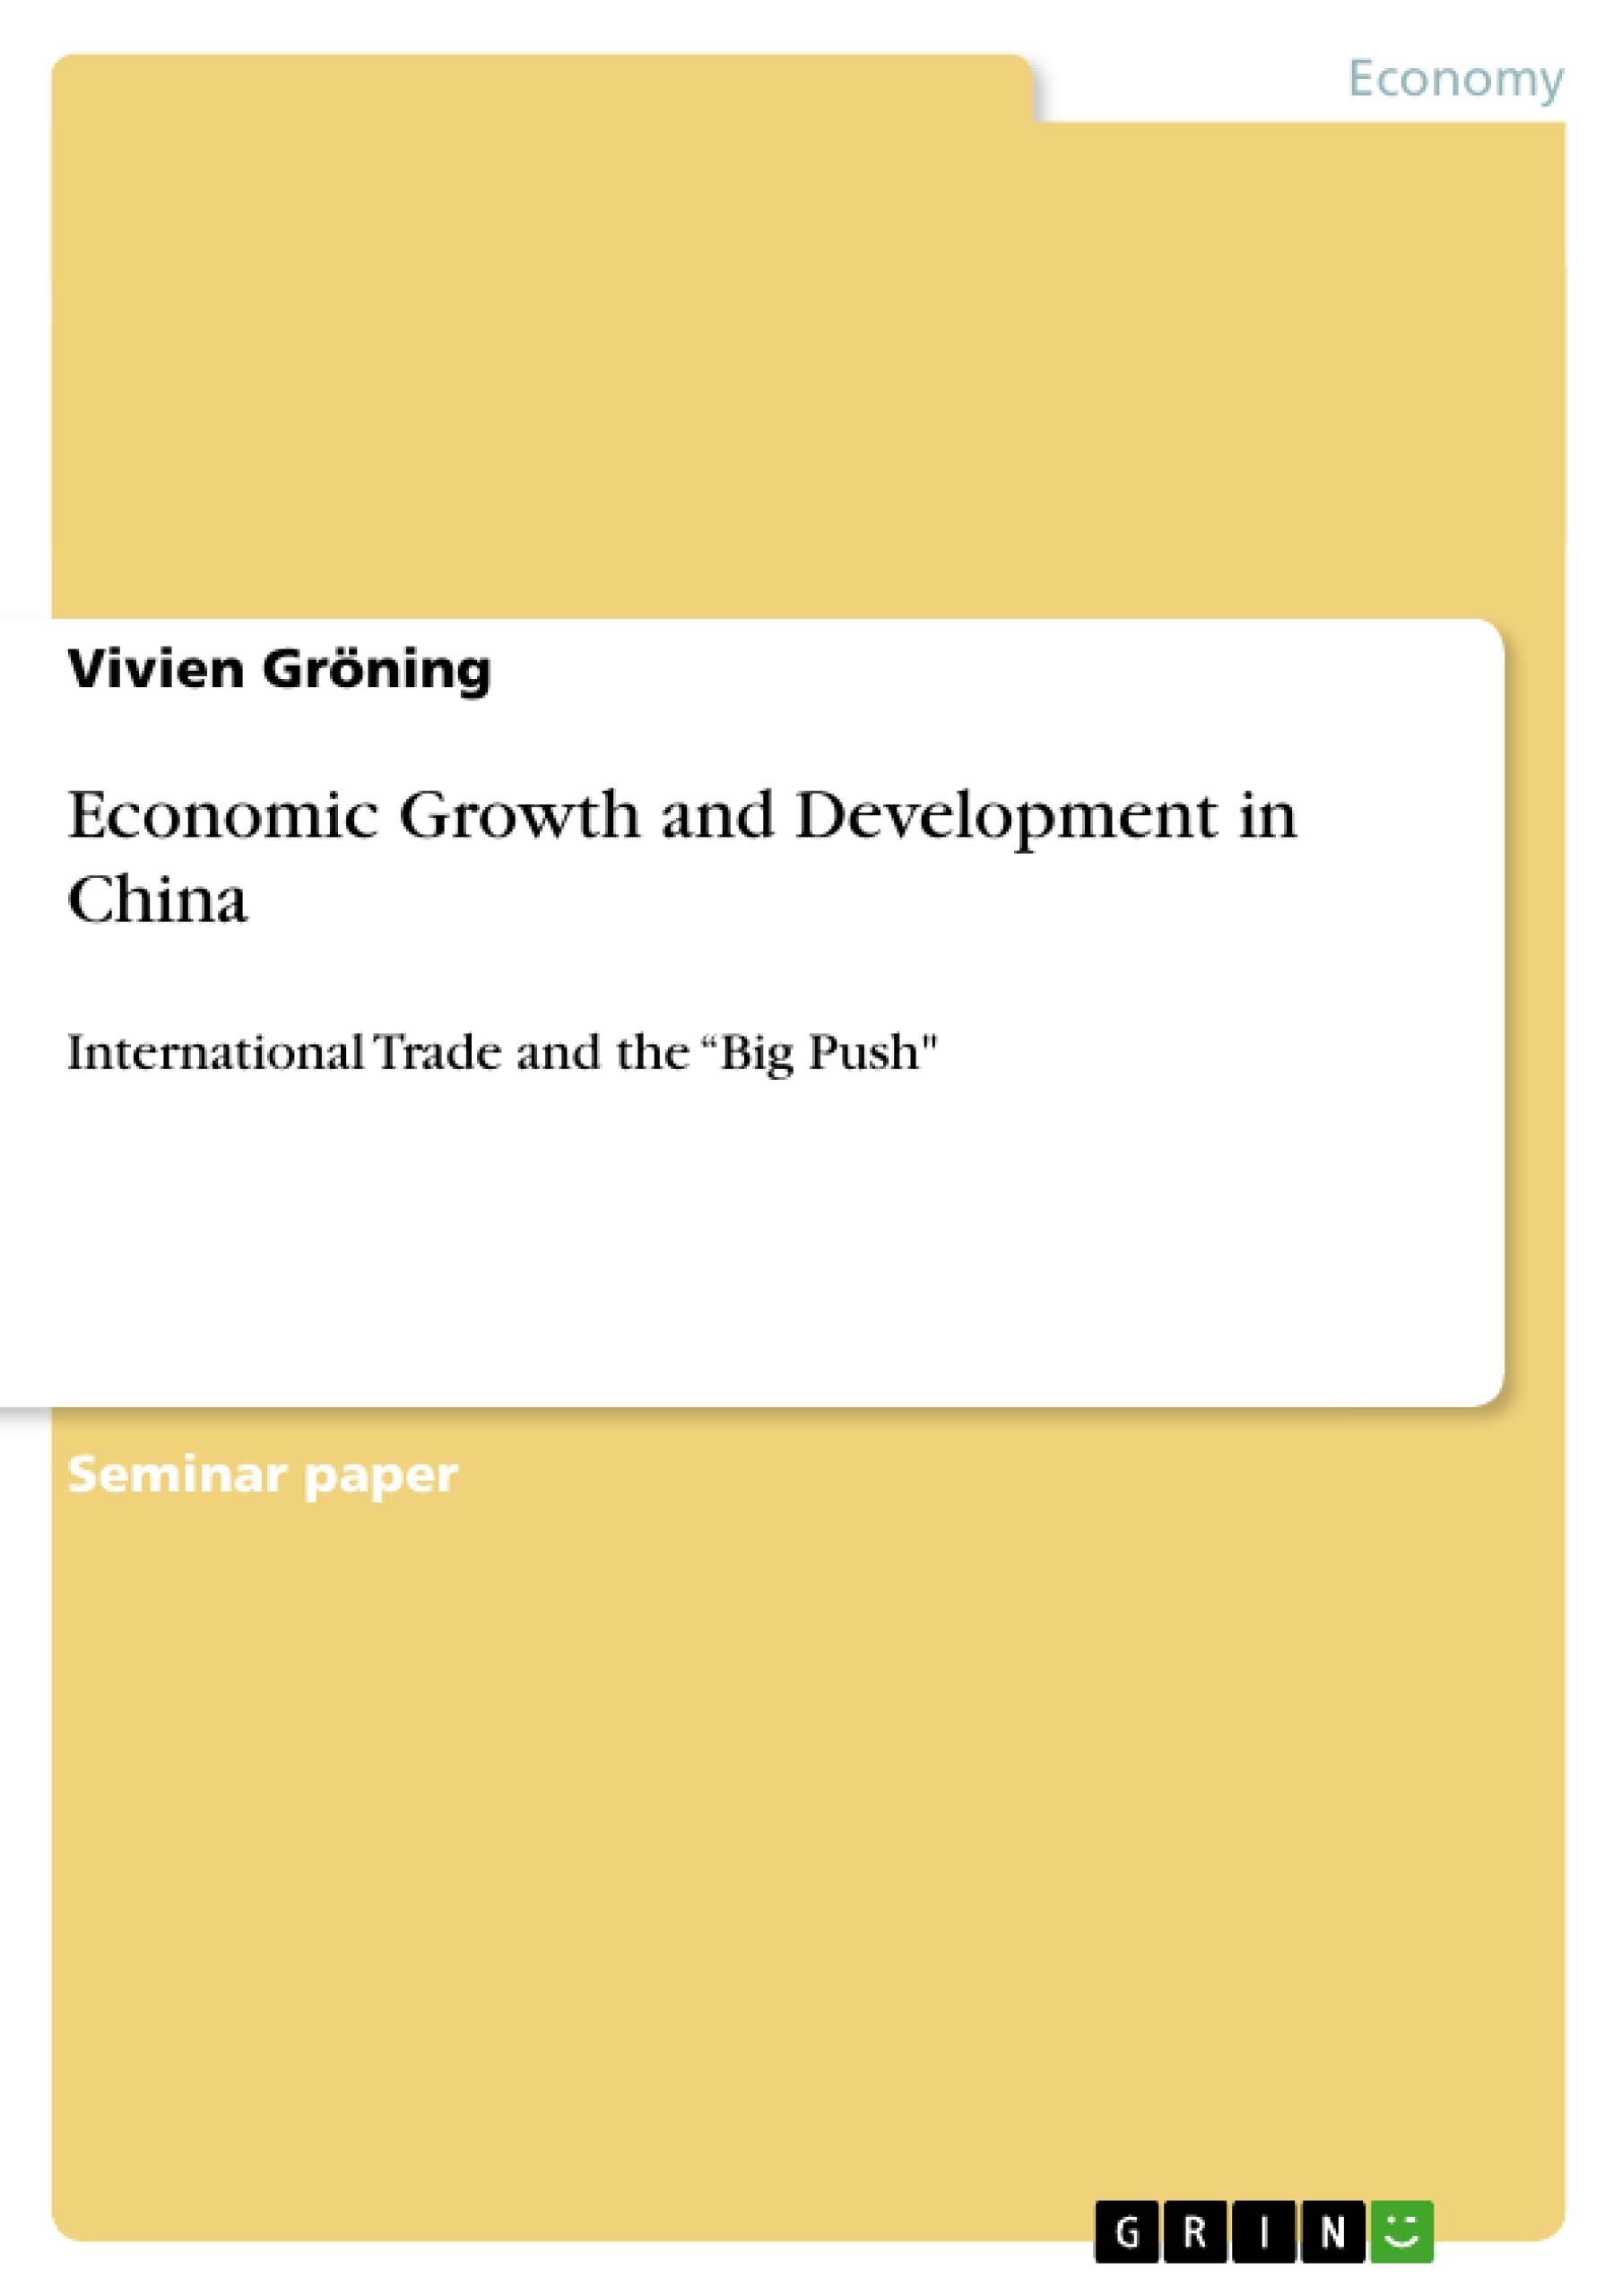 Title: Economic Growth and Development in China